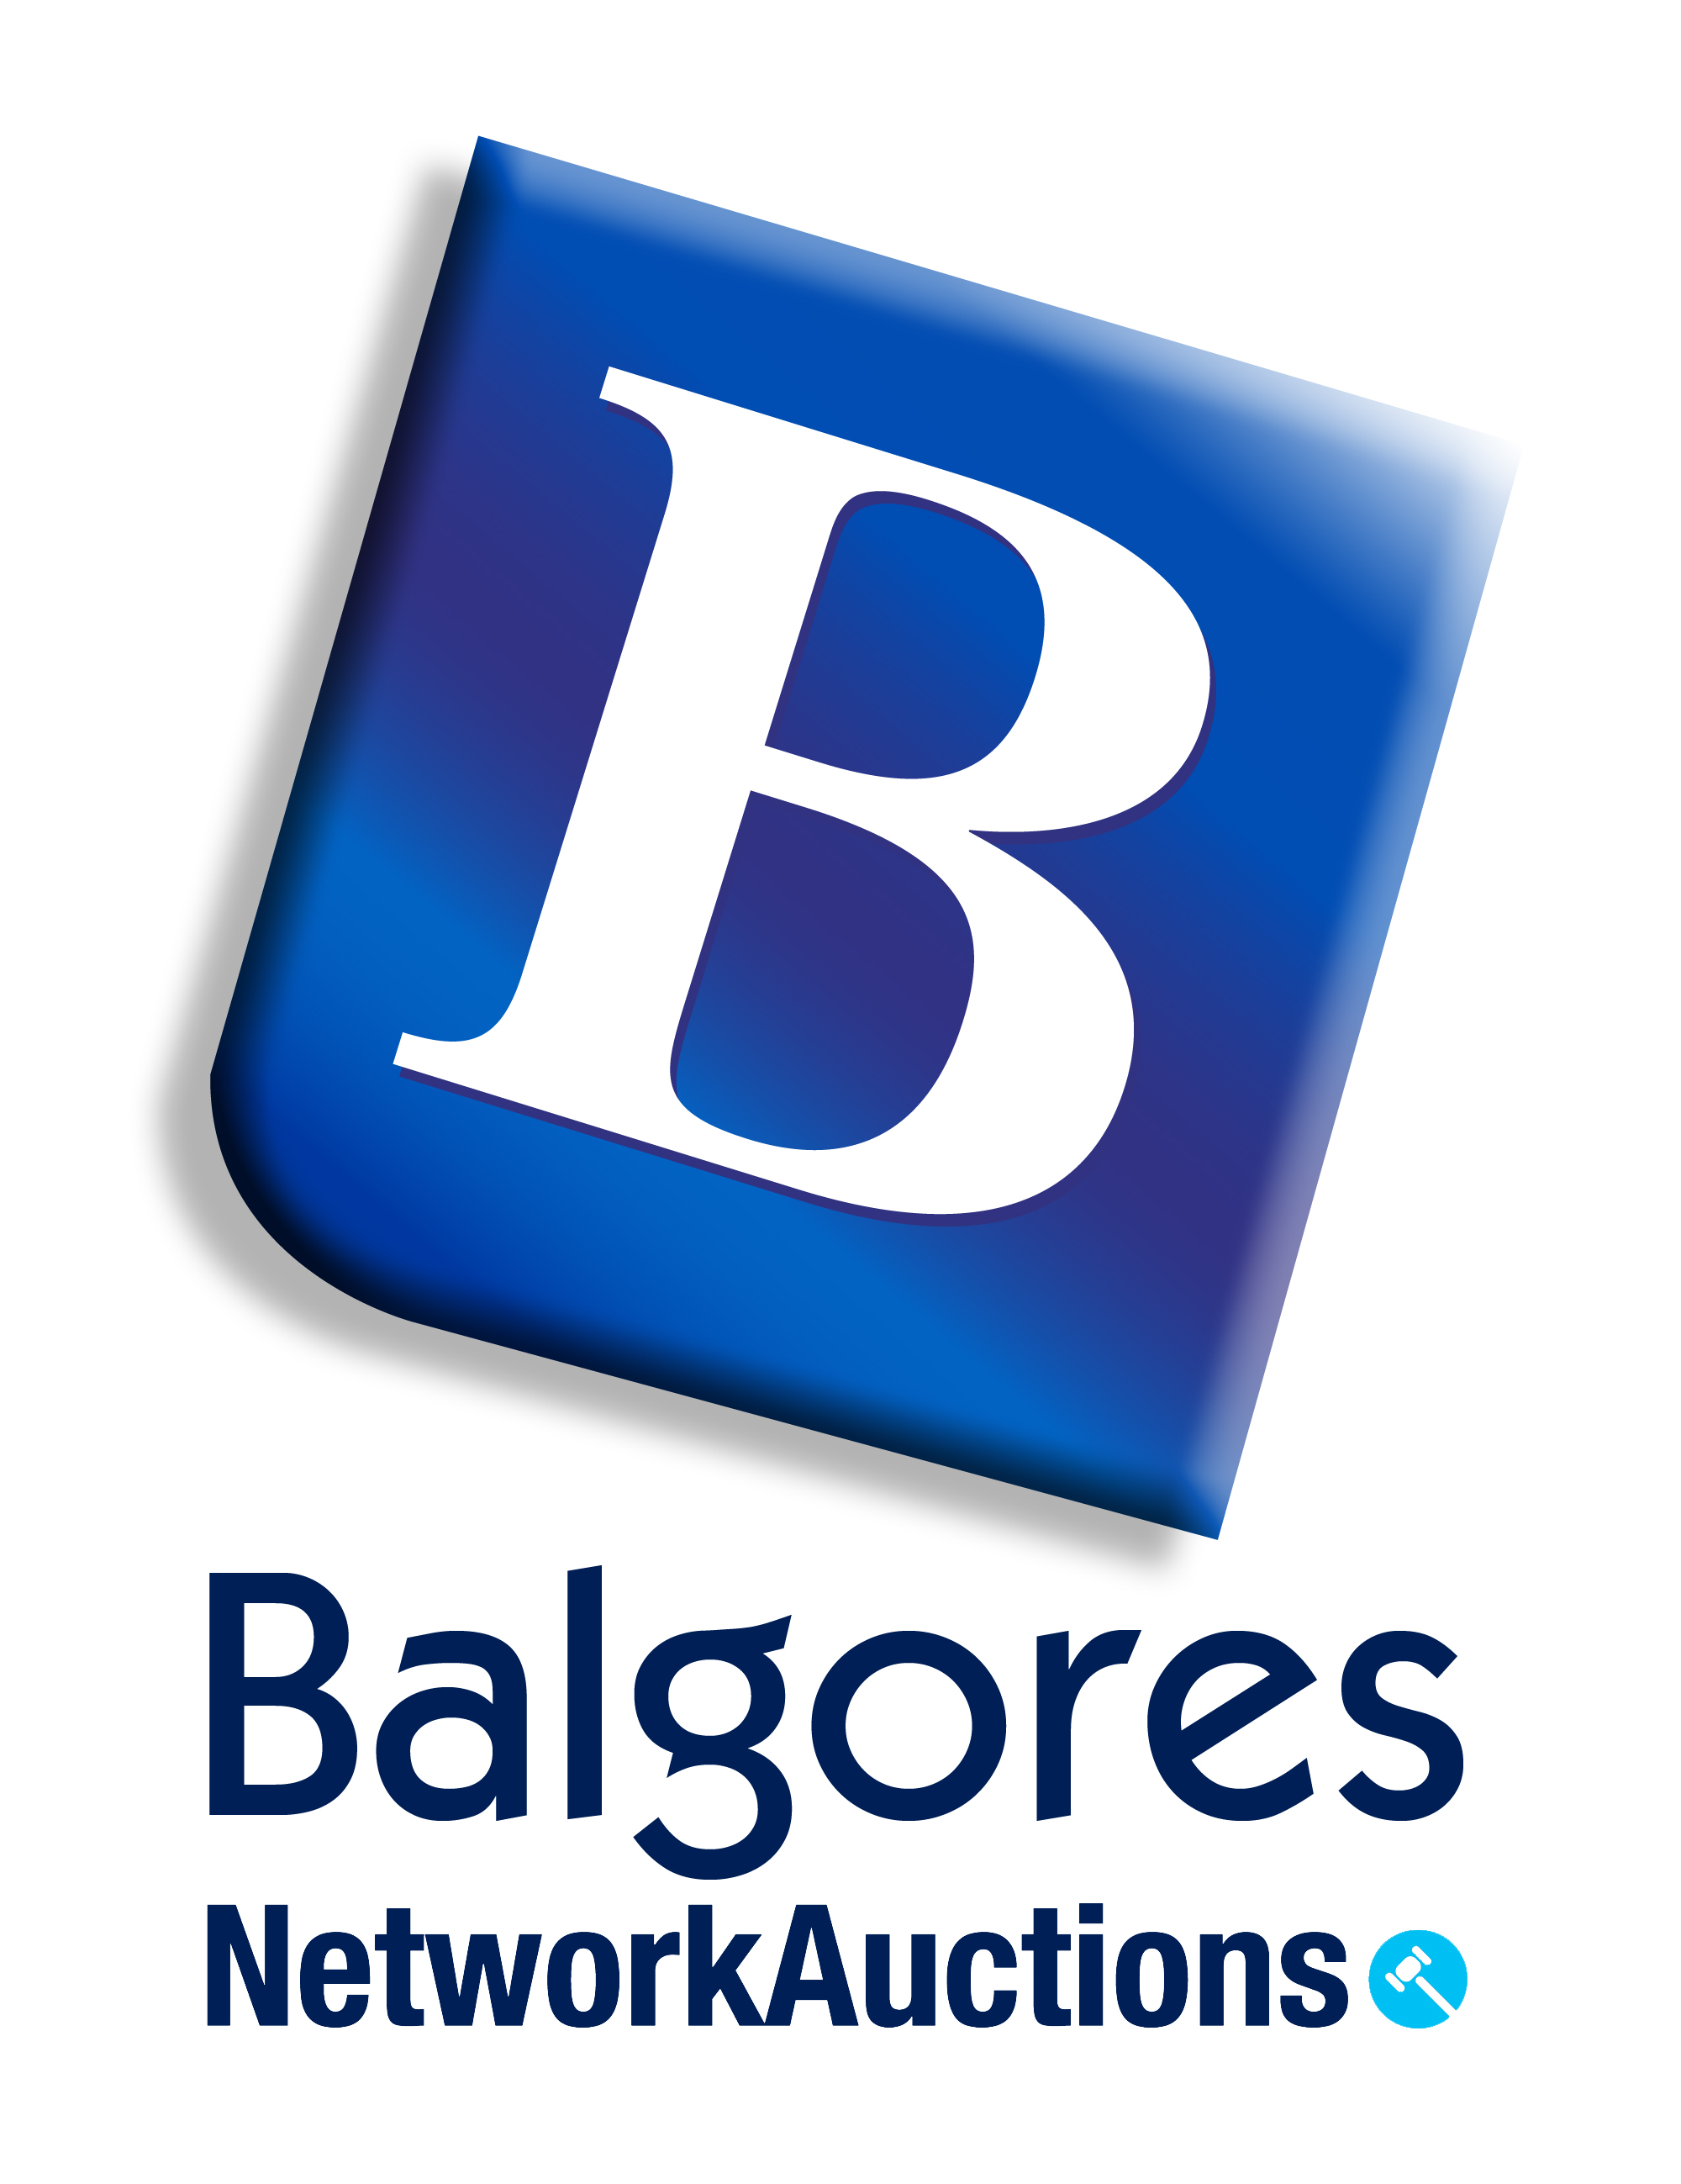 Please contact Balgores Network Auctions on 01708 470756.